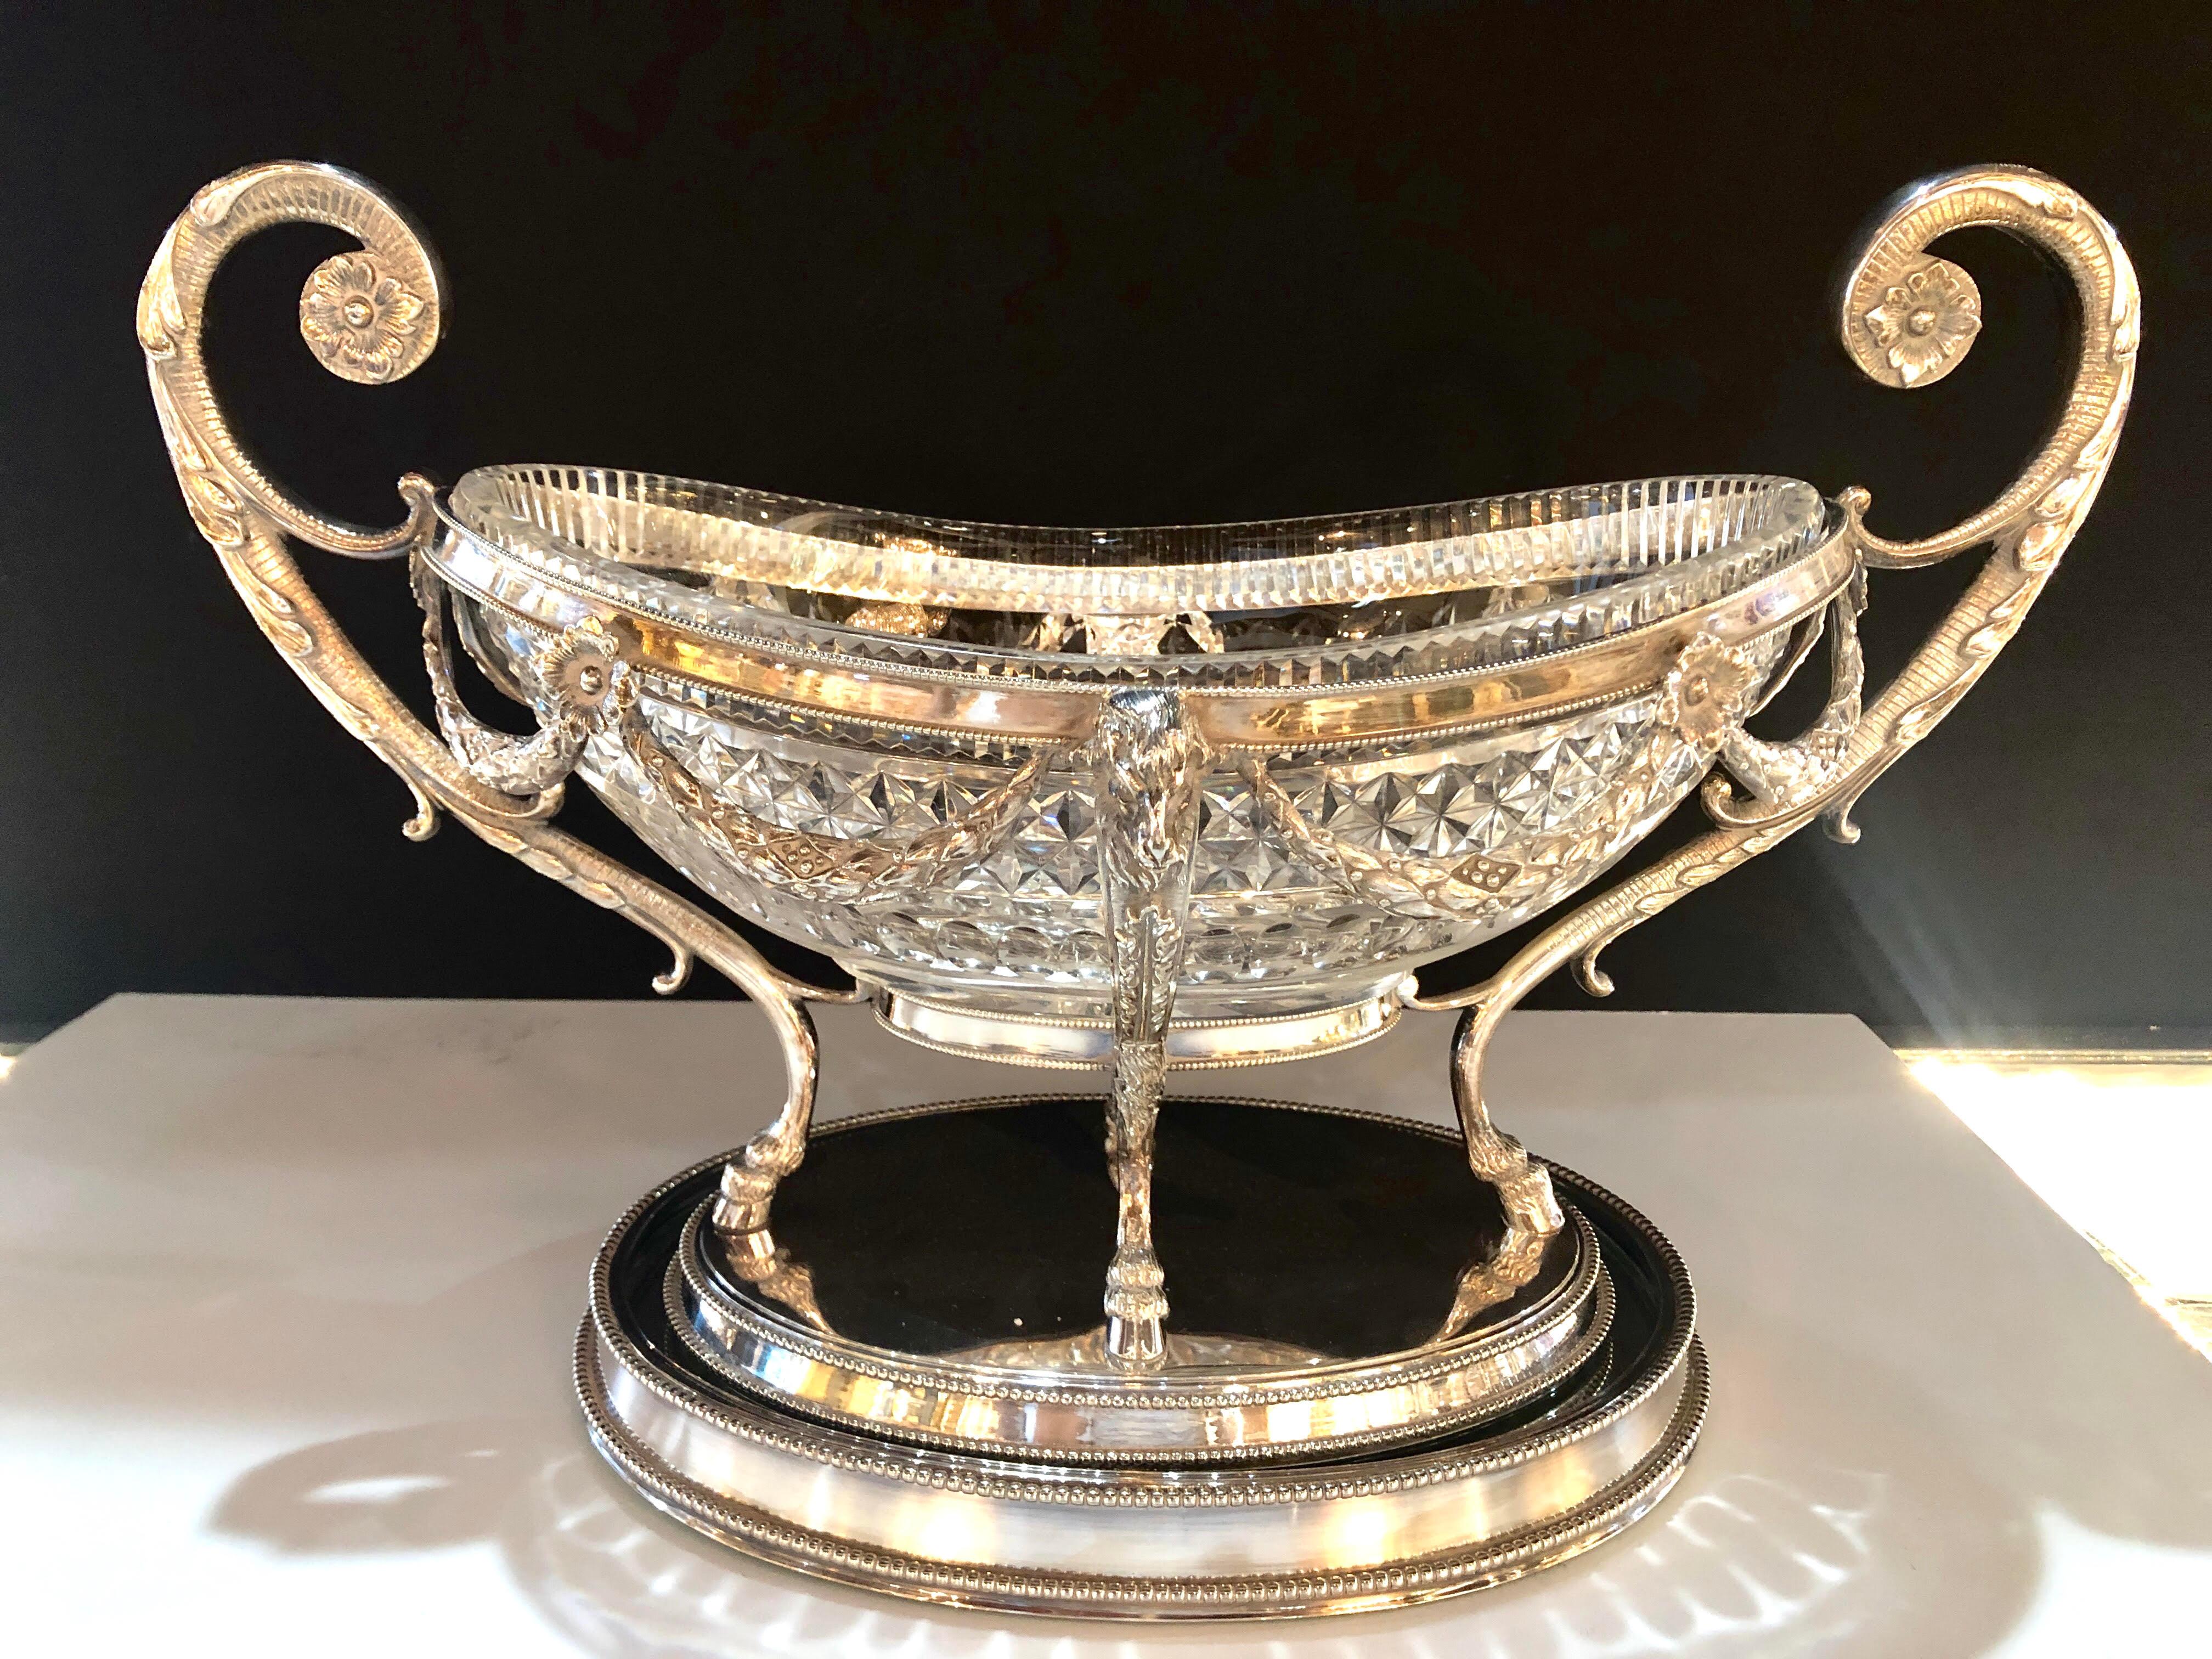 Spectacular 19th century George III style silver plated oval center bowl with cut glass liner on a mirrored plated tray. This large and impressive center piece has solid and sturdy handles supporting a center apron depicting rams horned busts